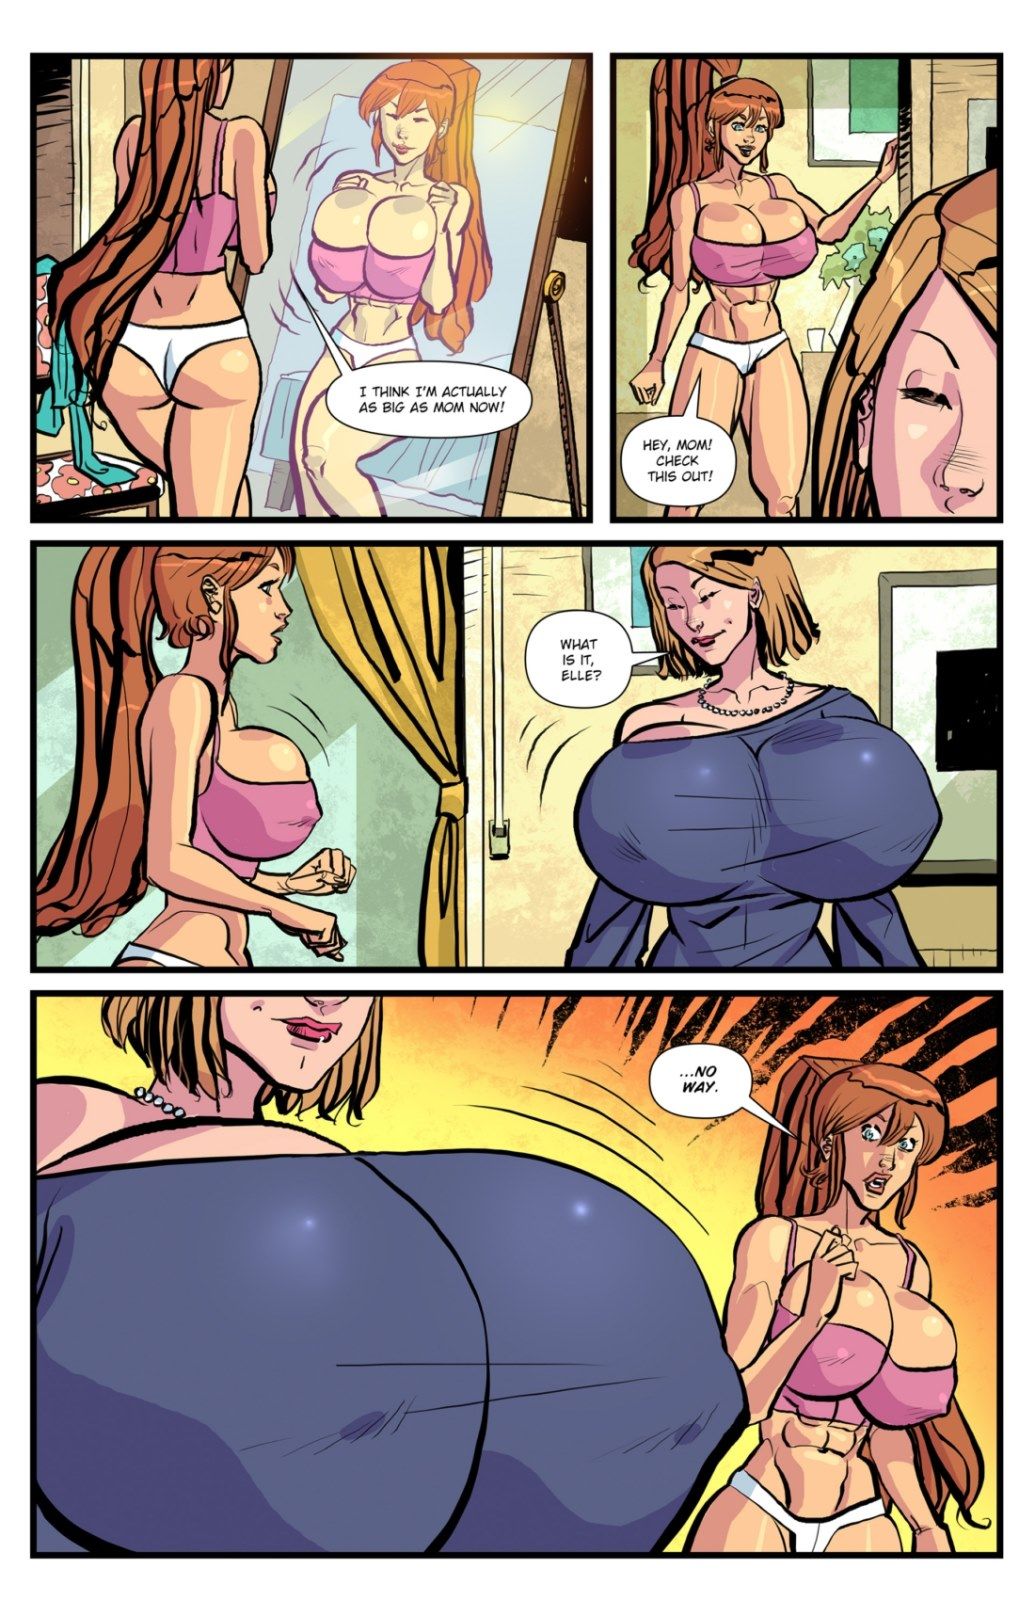 Expansionfan-The Only Tea for Me page 9